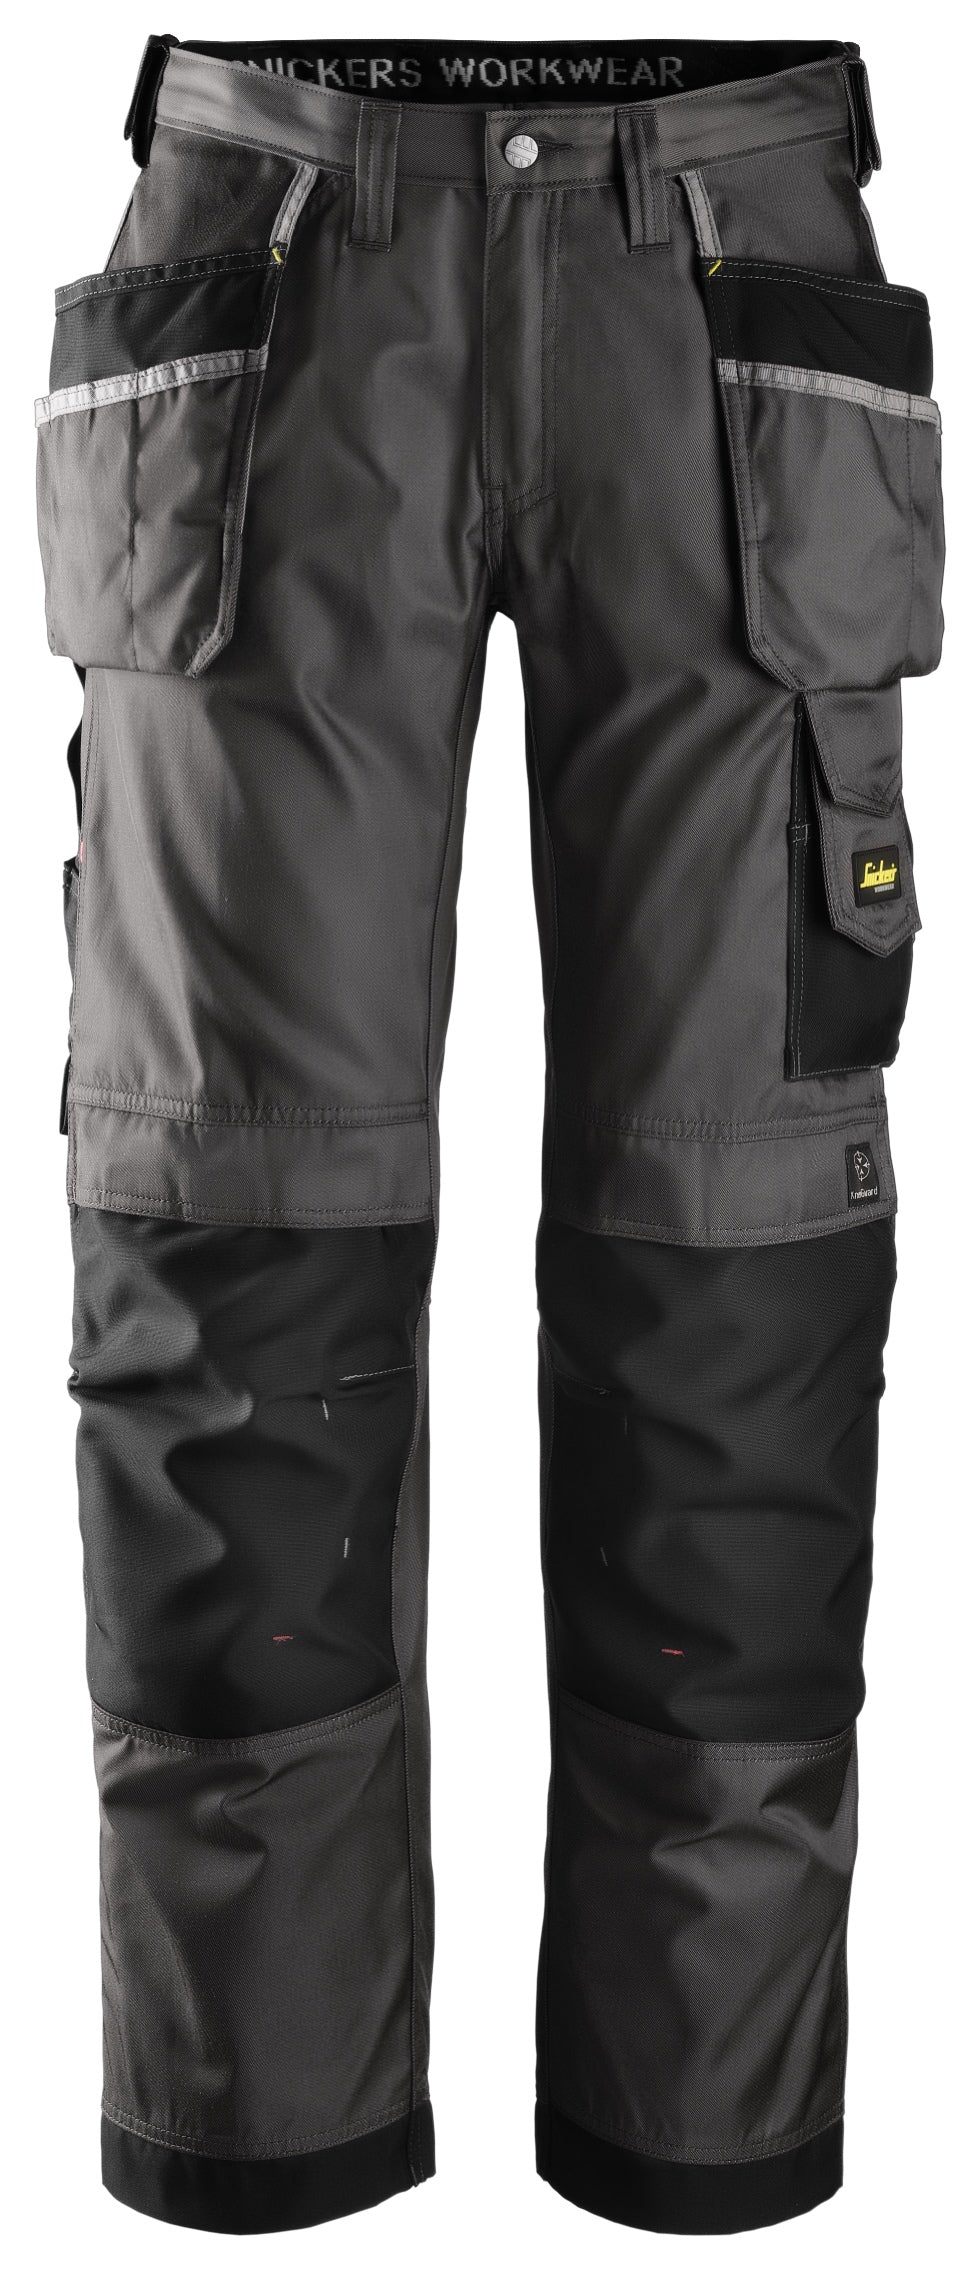 Snickers 3312 Duratwill Trousers, Dgrey Muted black\Black